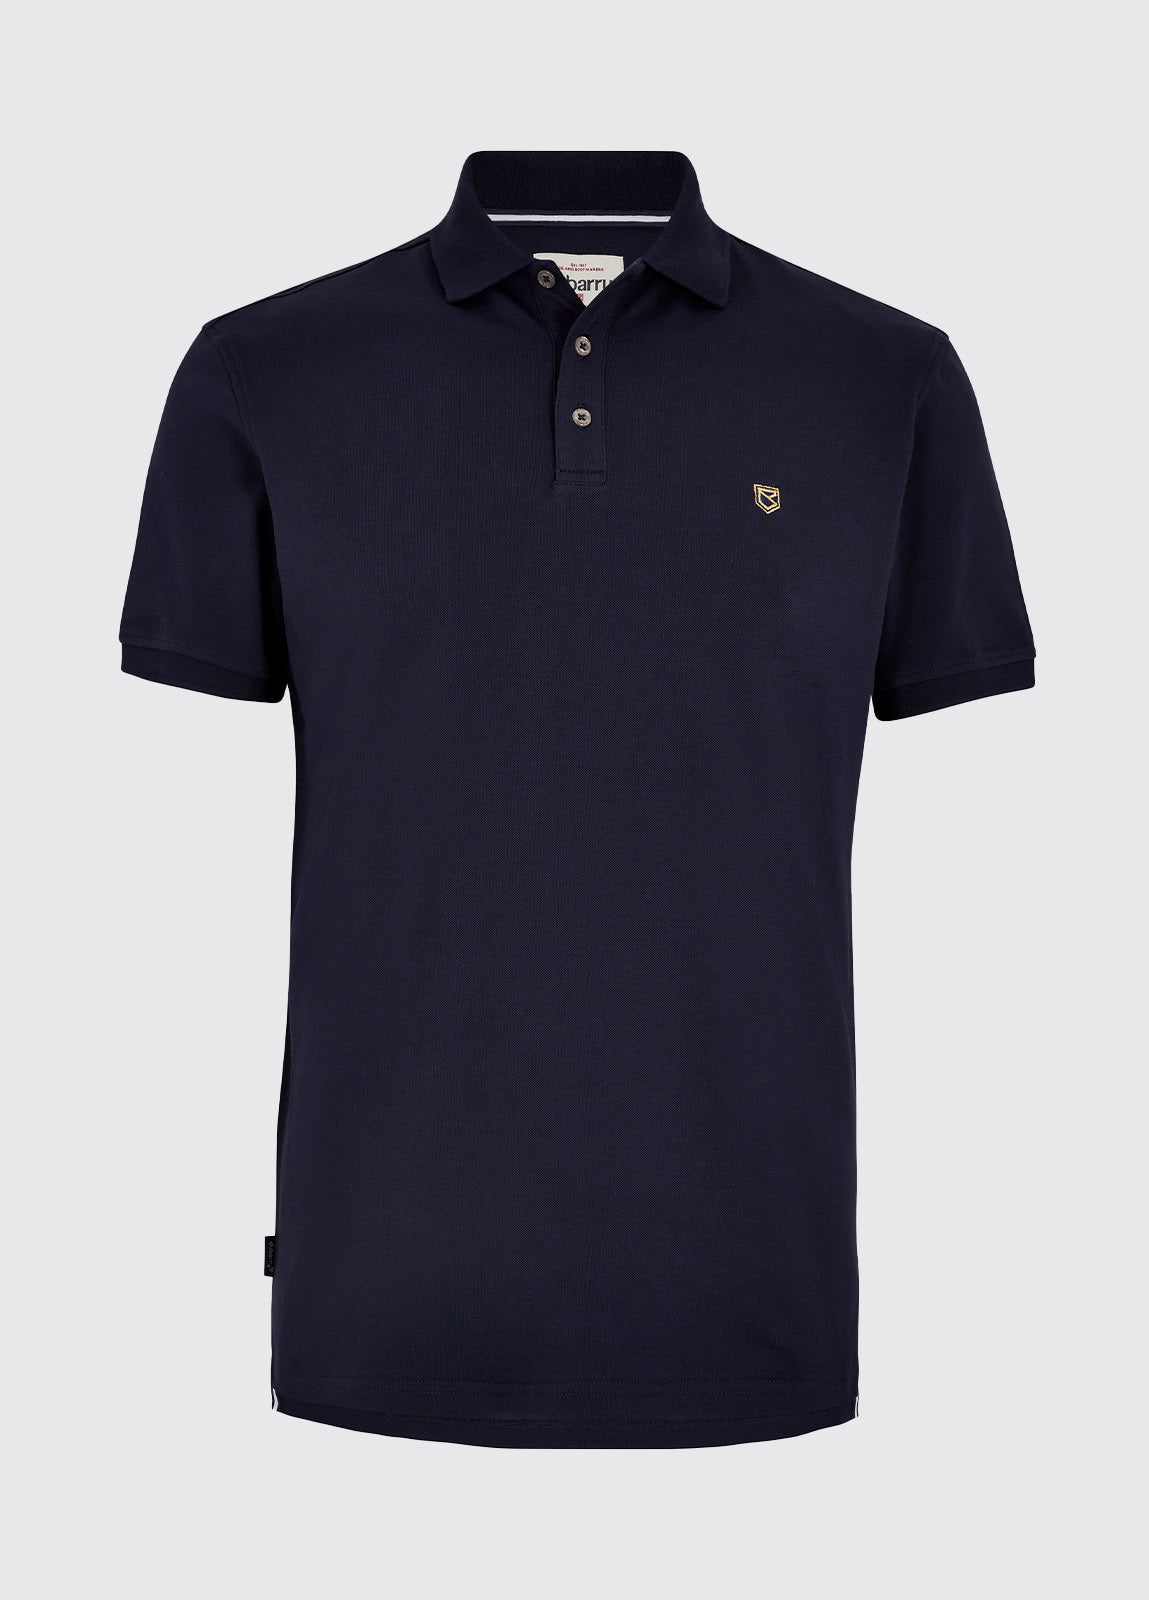 Dubarry Quinlan 4-Way Stretch Polo - Navy